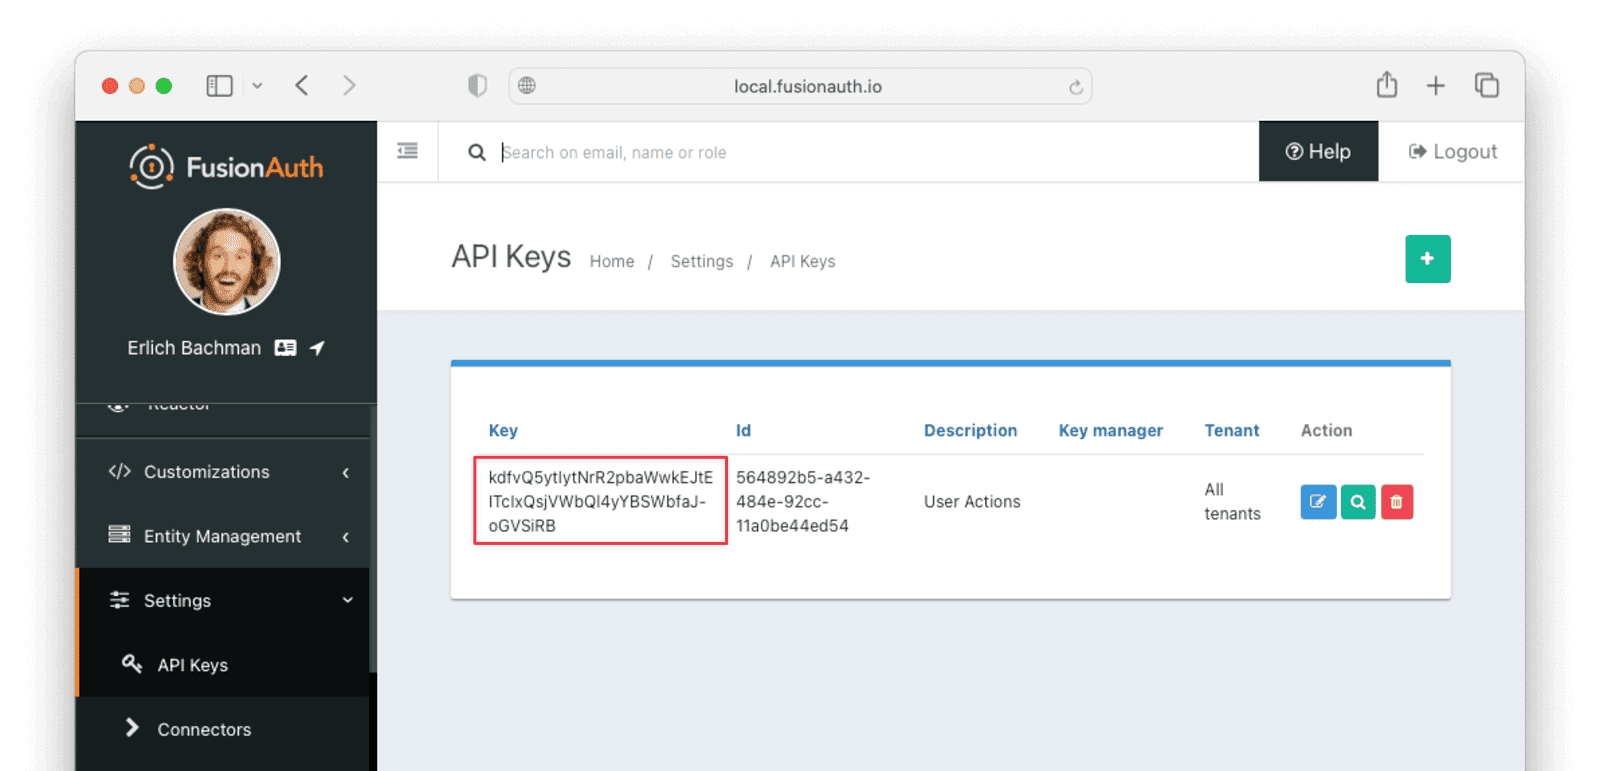 Record the value of the API key to use later.